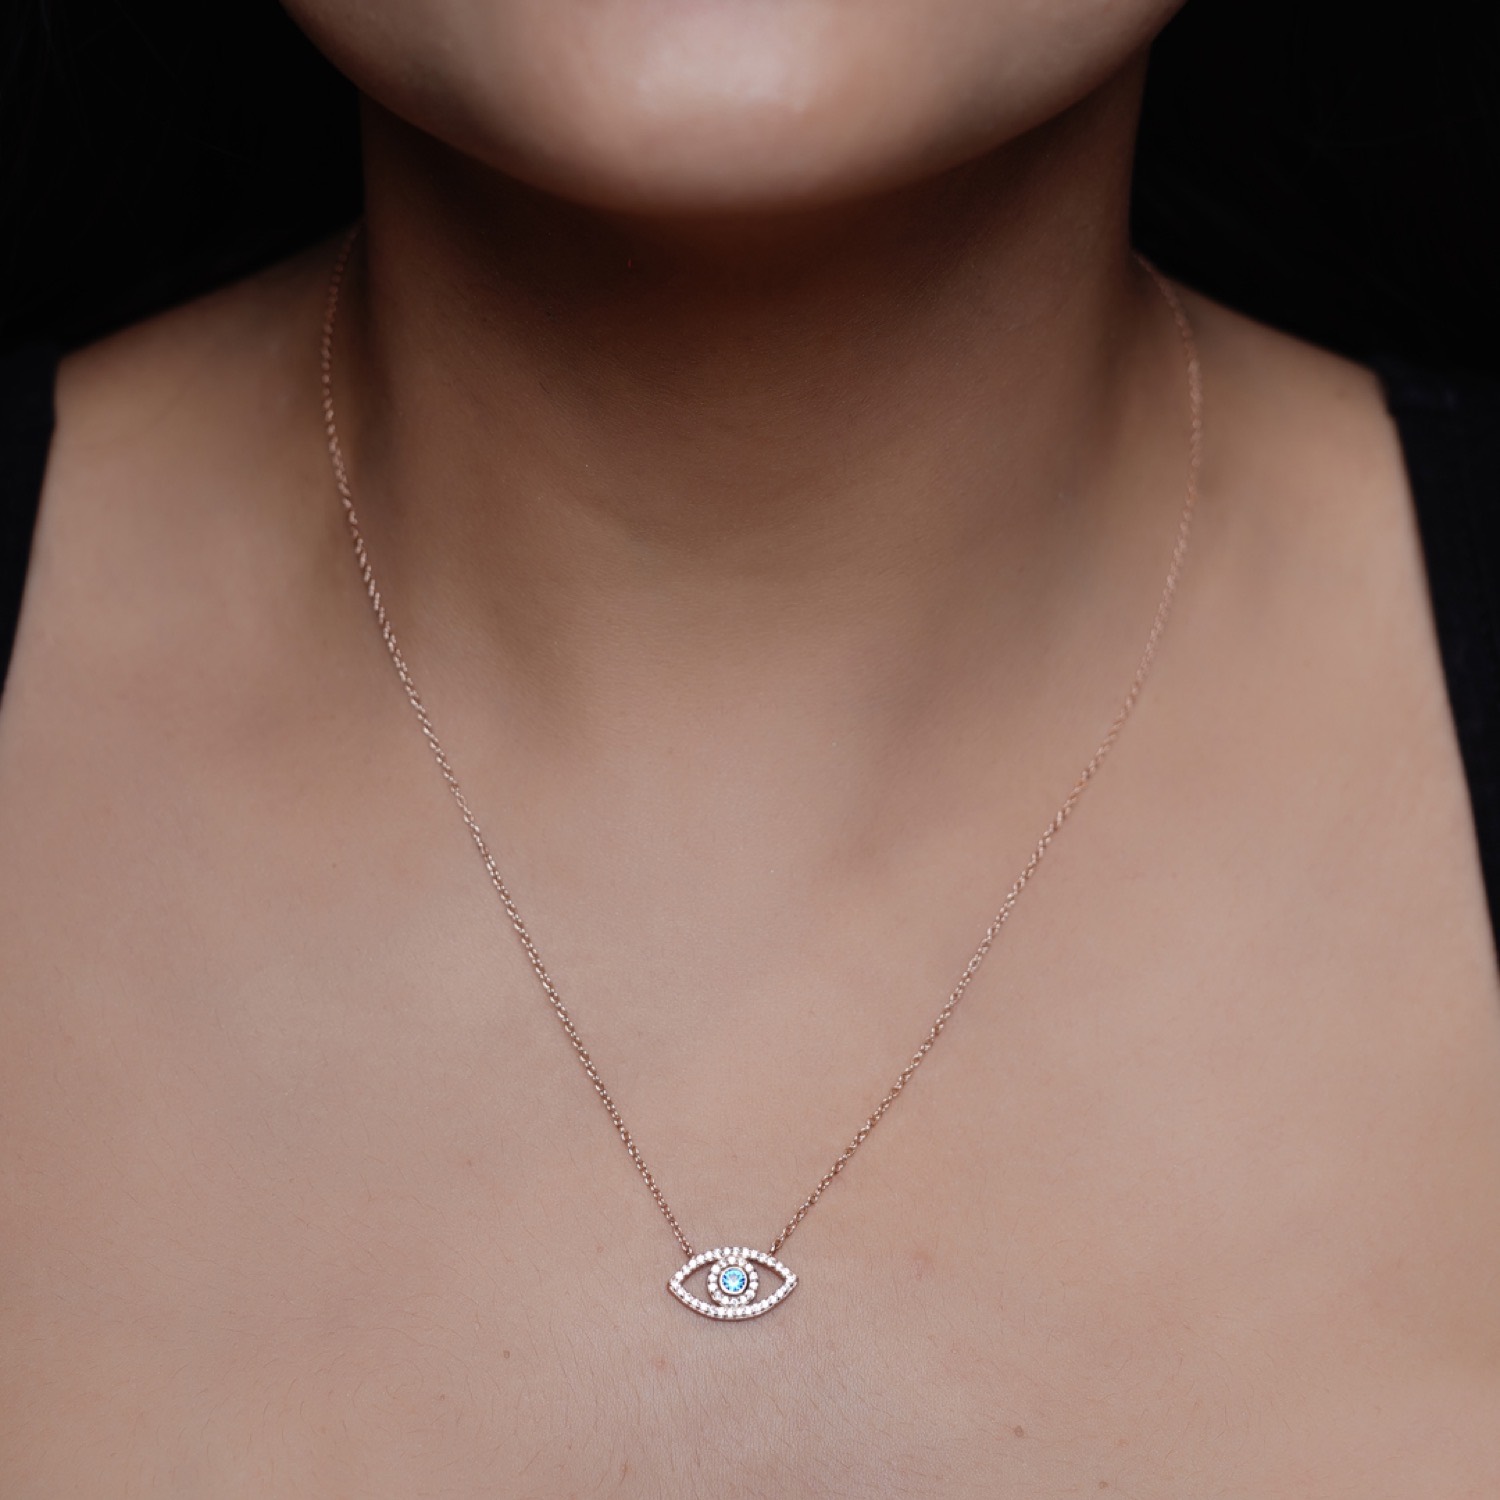 varam_chain_102022_white_and_blue_stone_eye_shaped_pendant_rose_gold_silver_chain-2